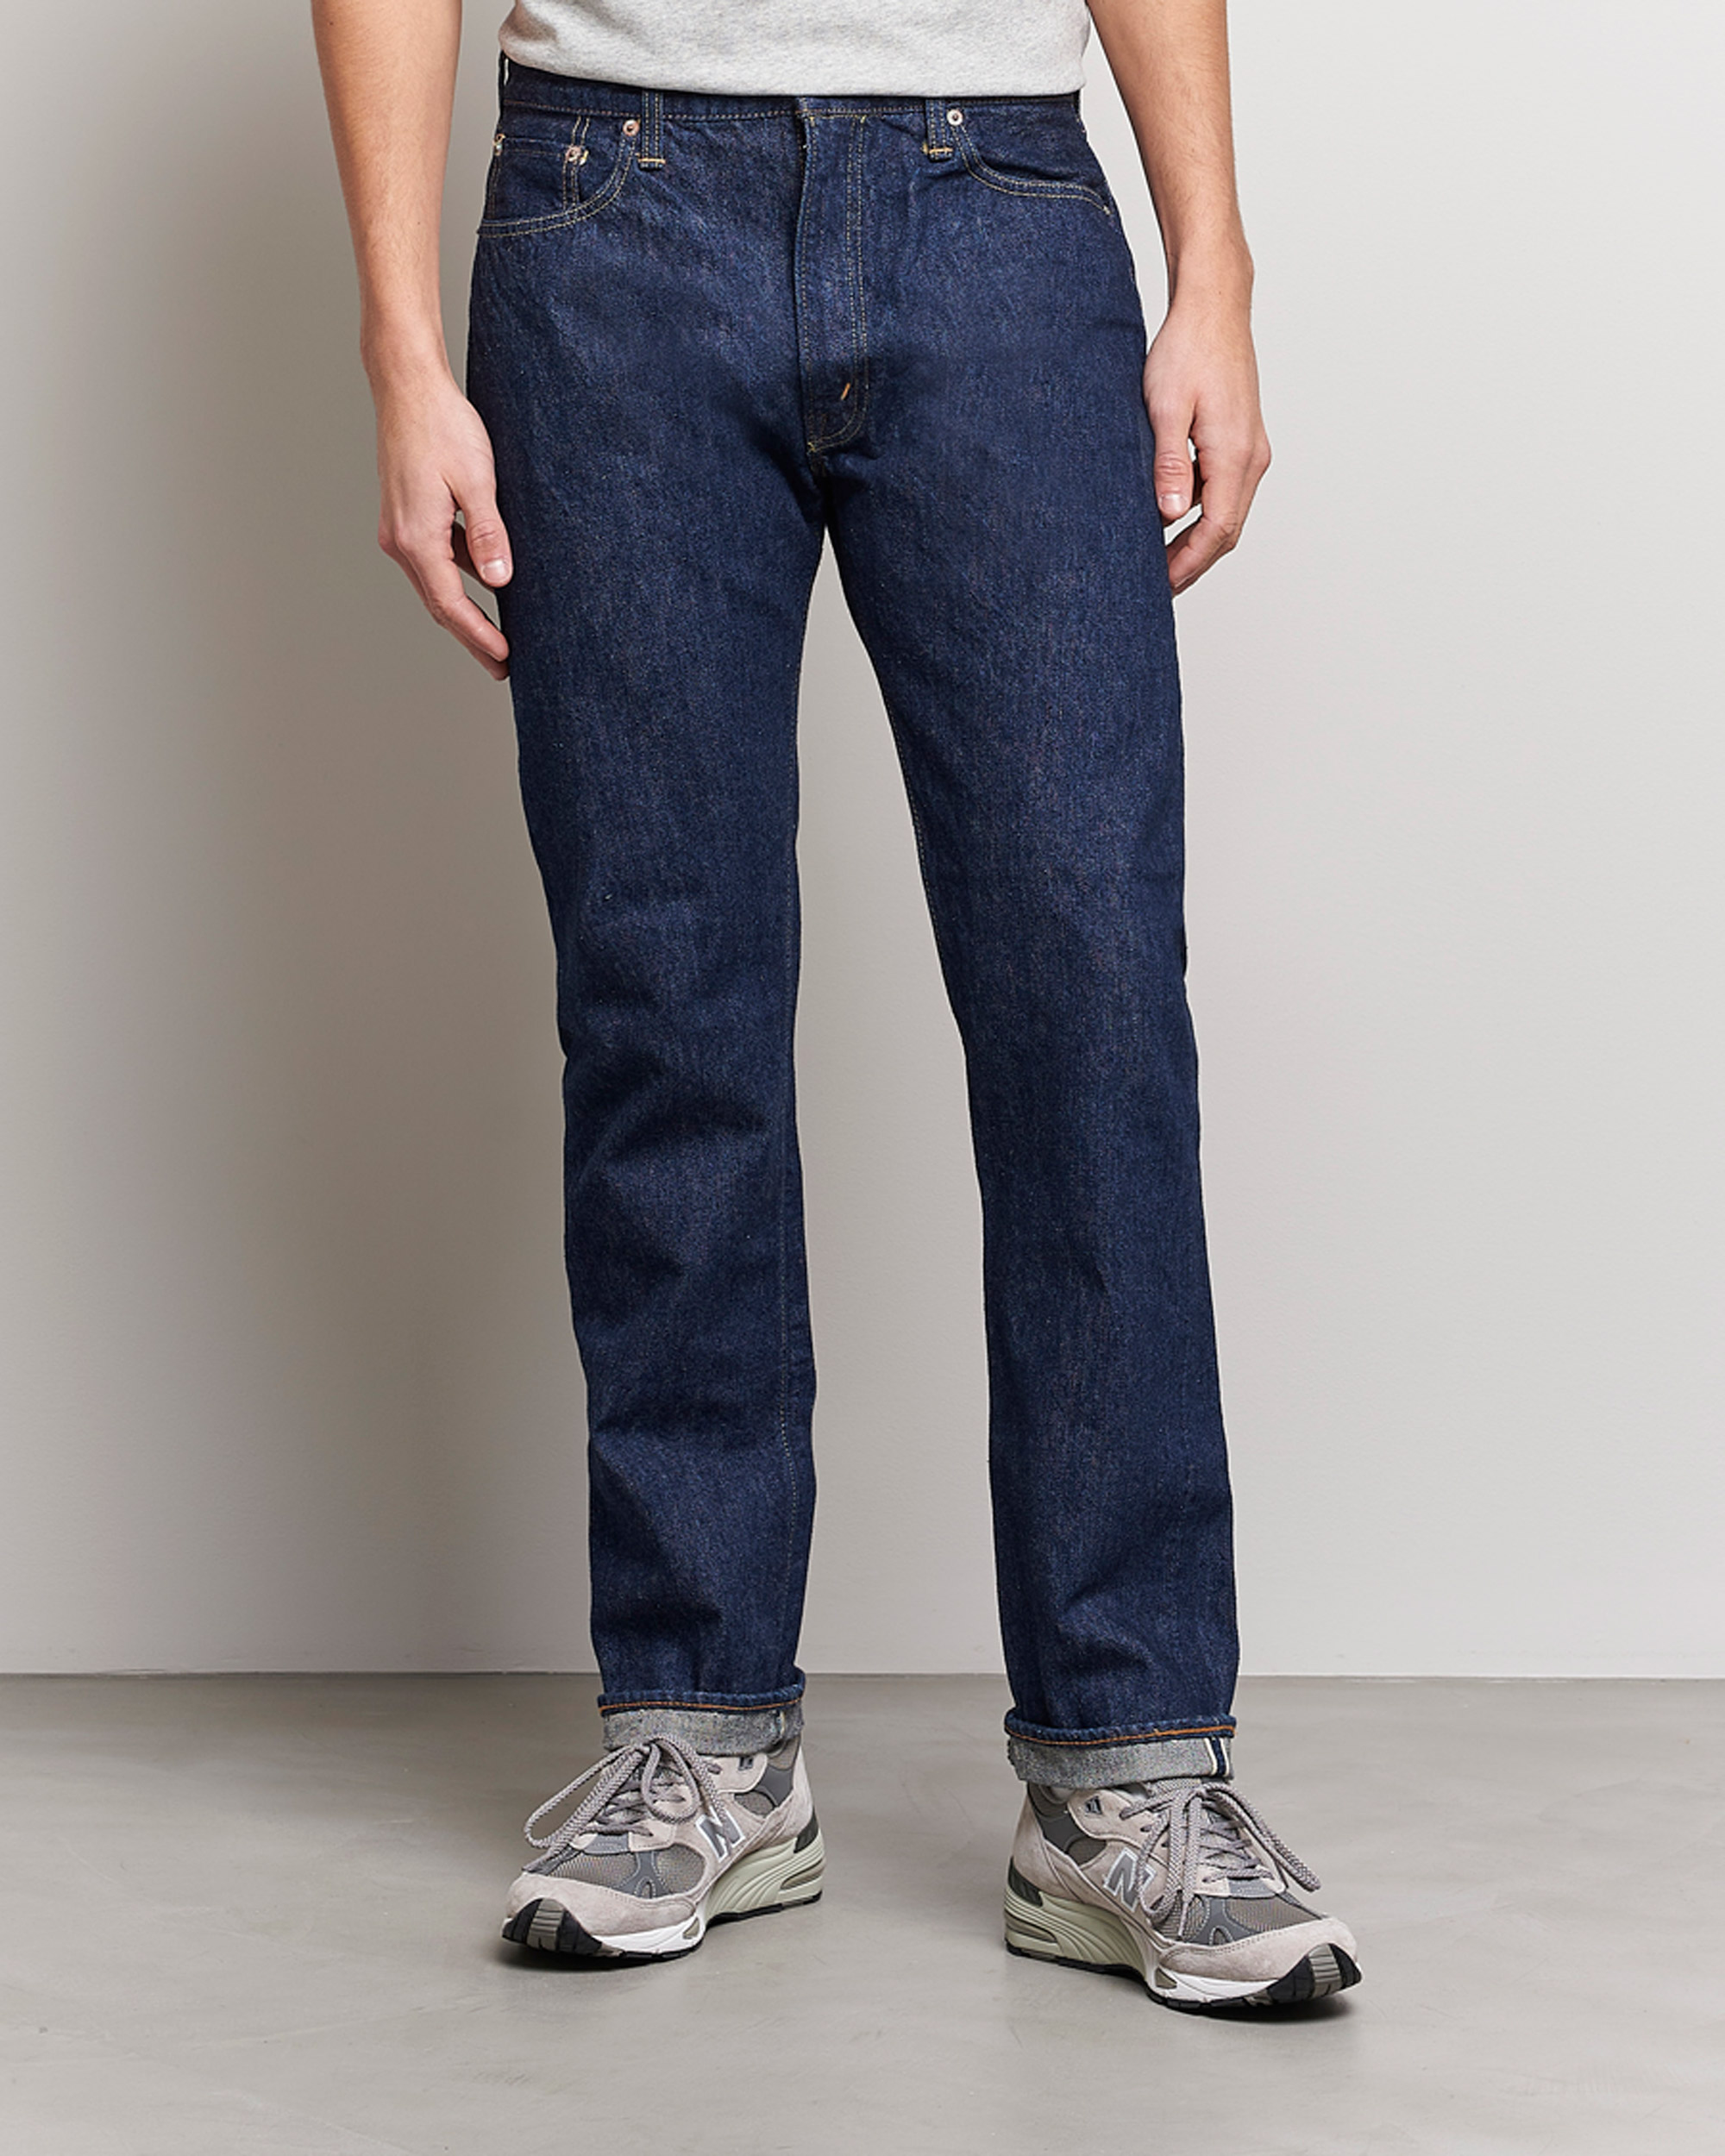 Herre | Blå jeans | orSlow | Tapered Fit 107 Selvedge Jeans One Wash